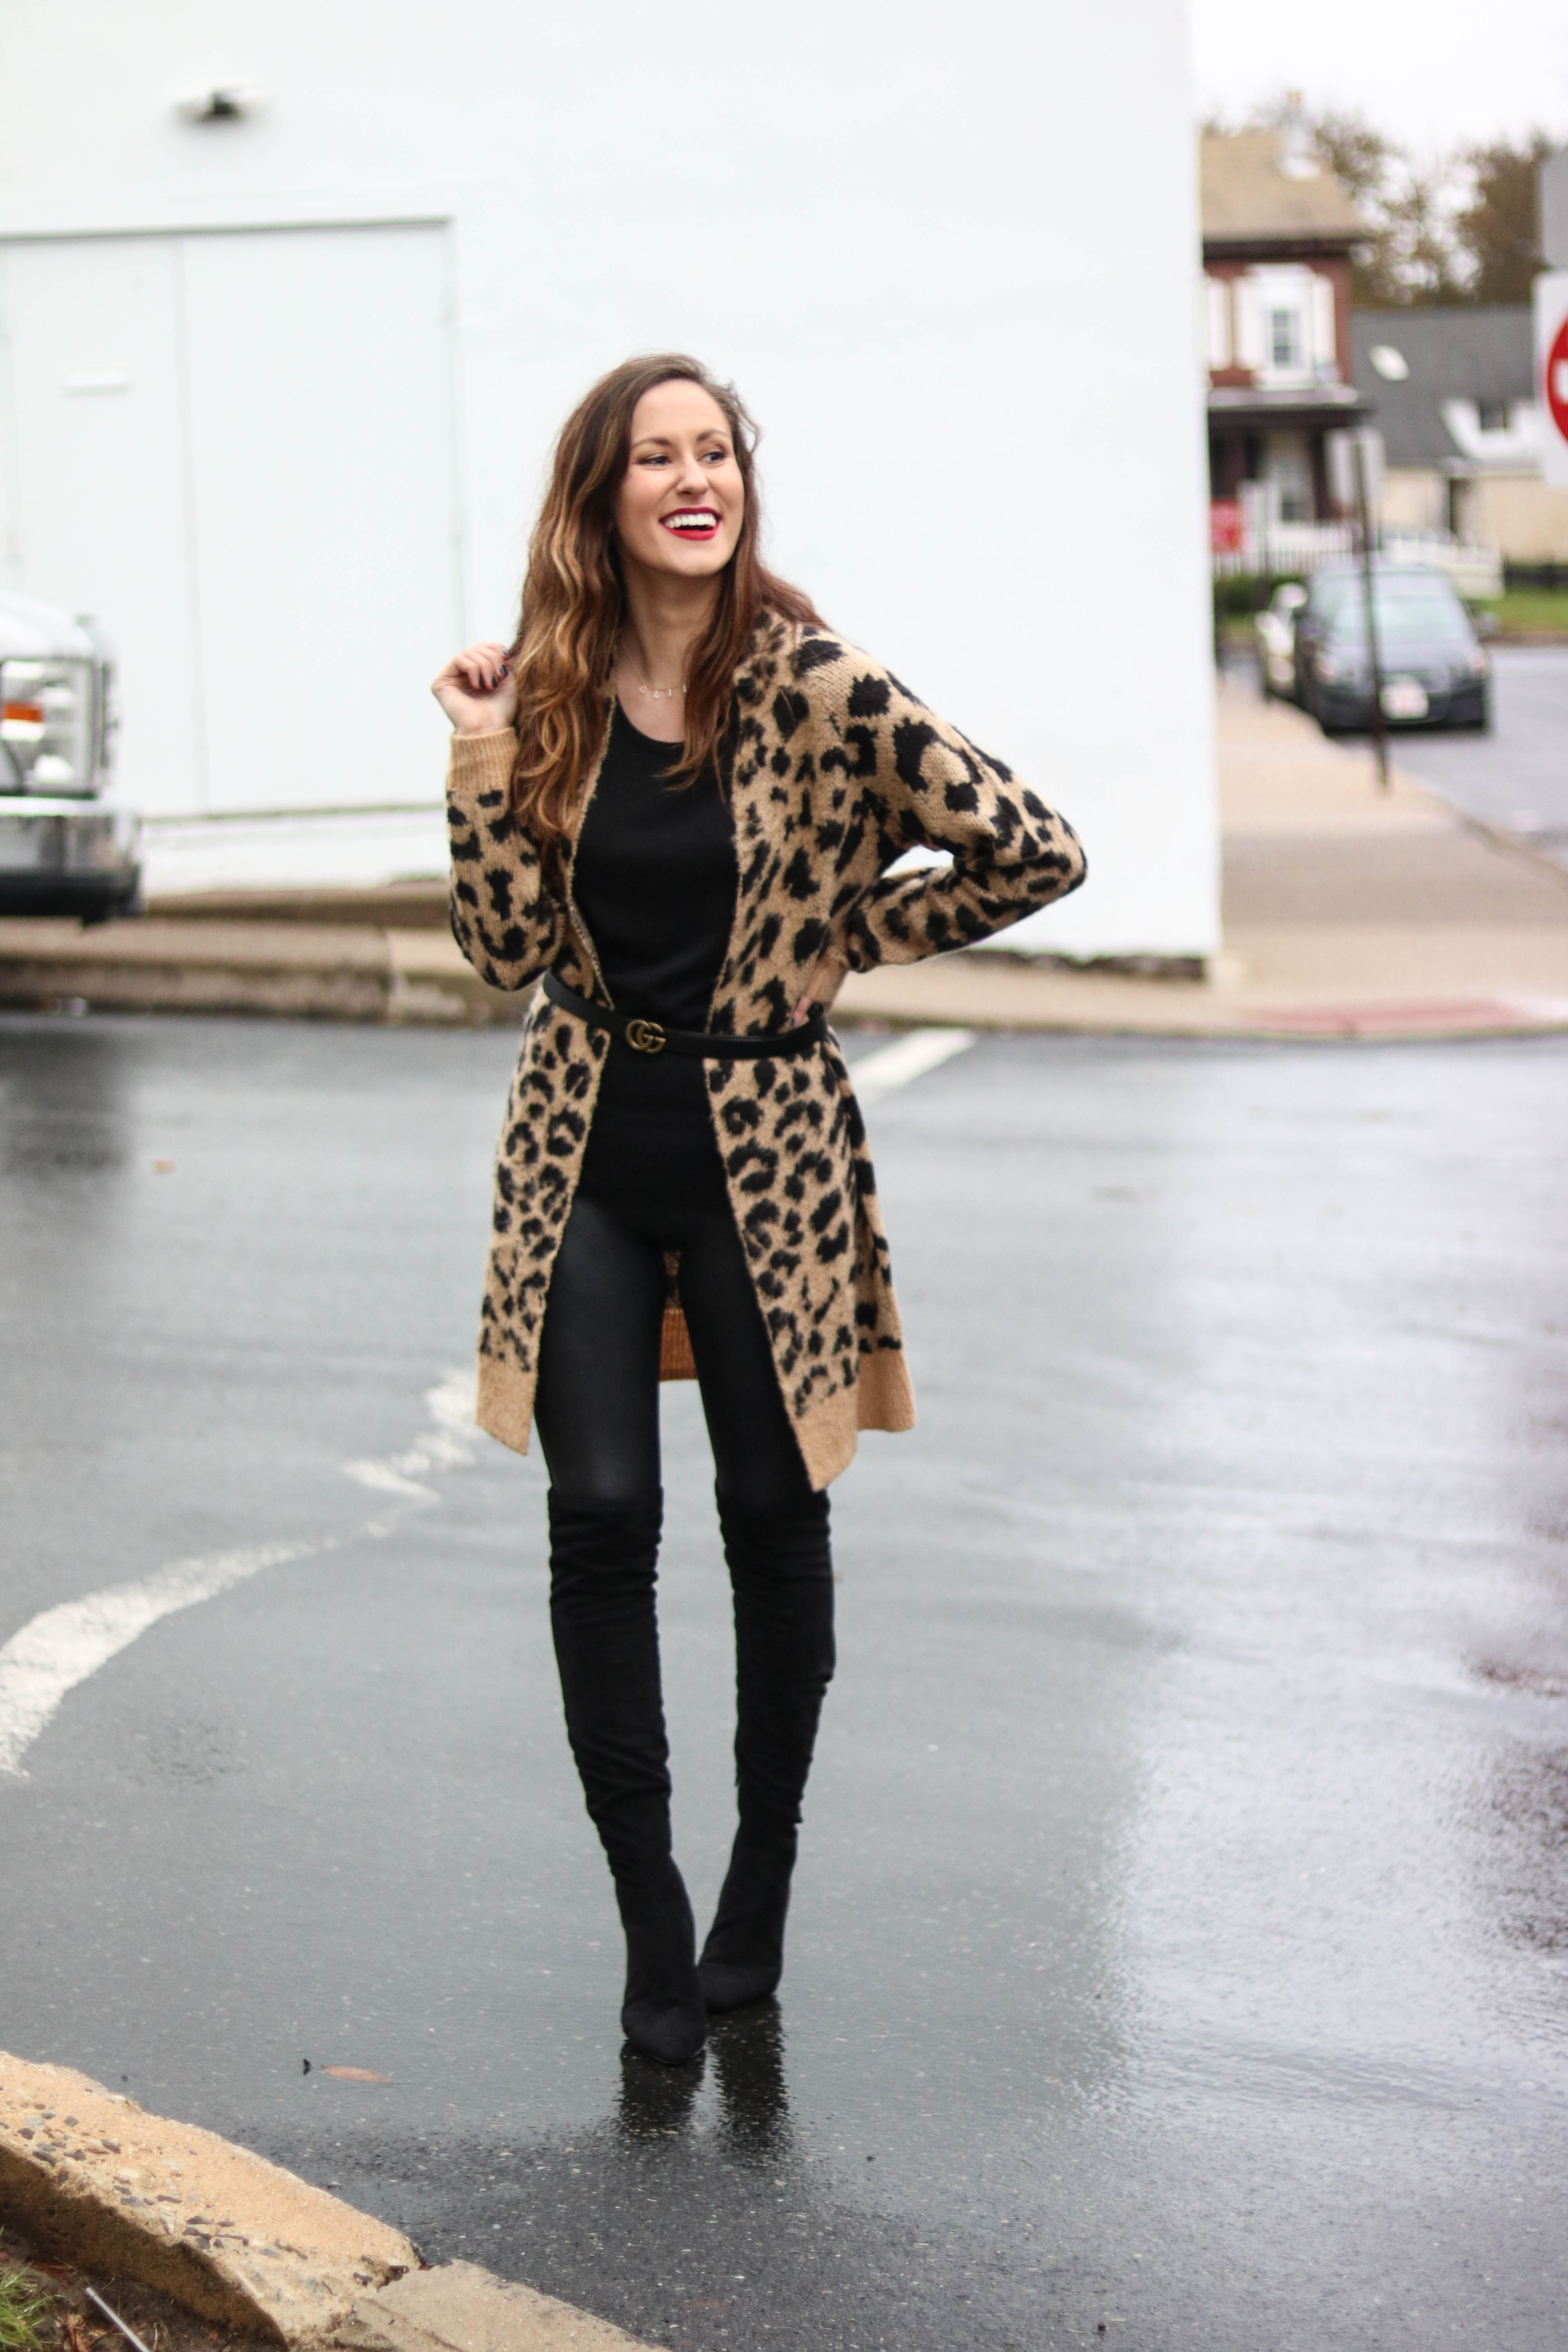 Leather Leggings Lookbook: 6 Ways to Style Leather Leggings, on Coming Up Roses